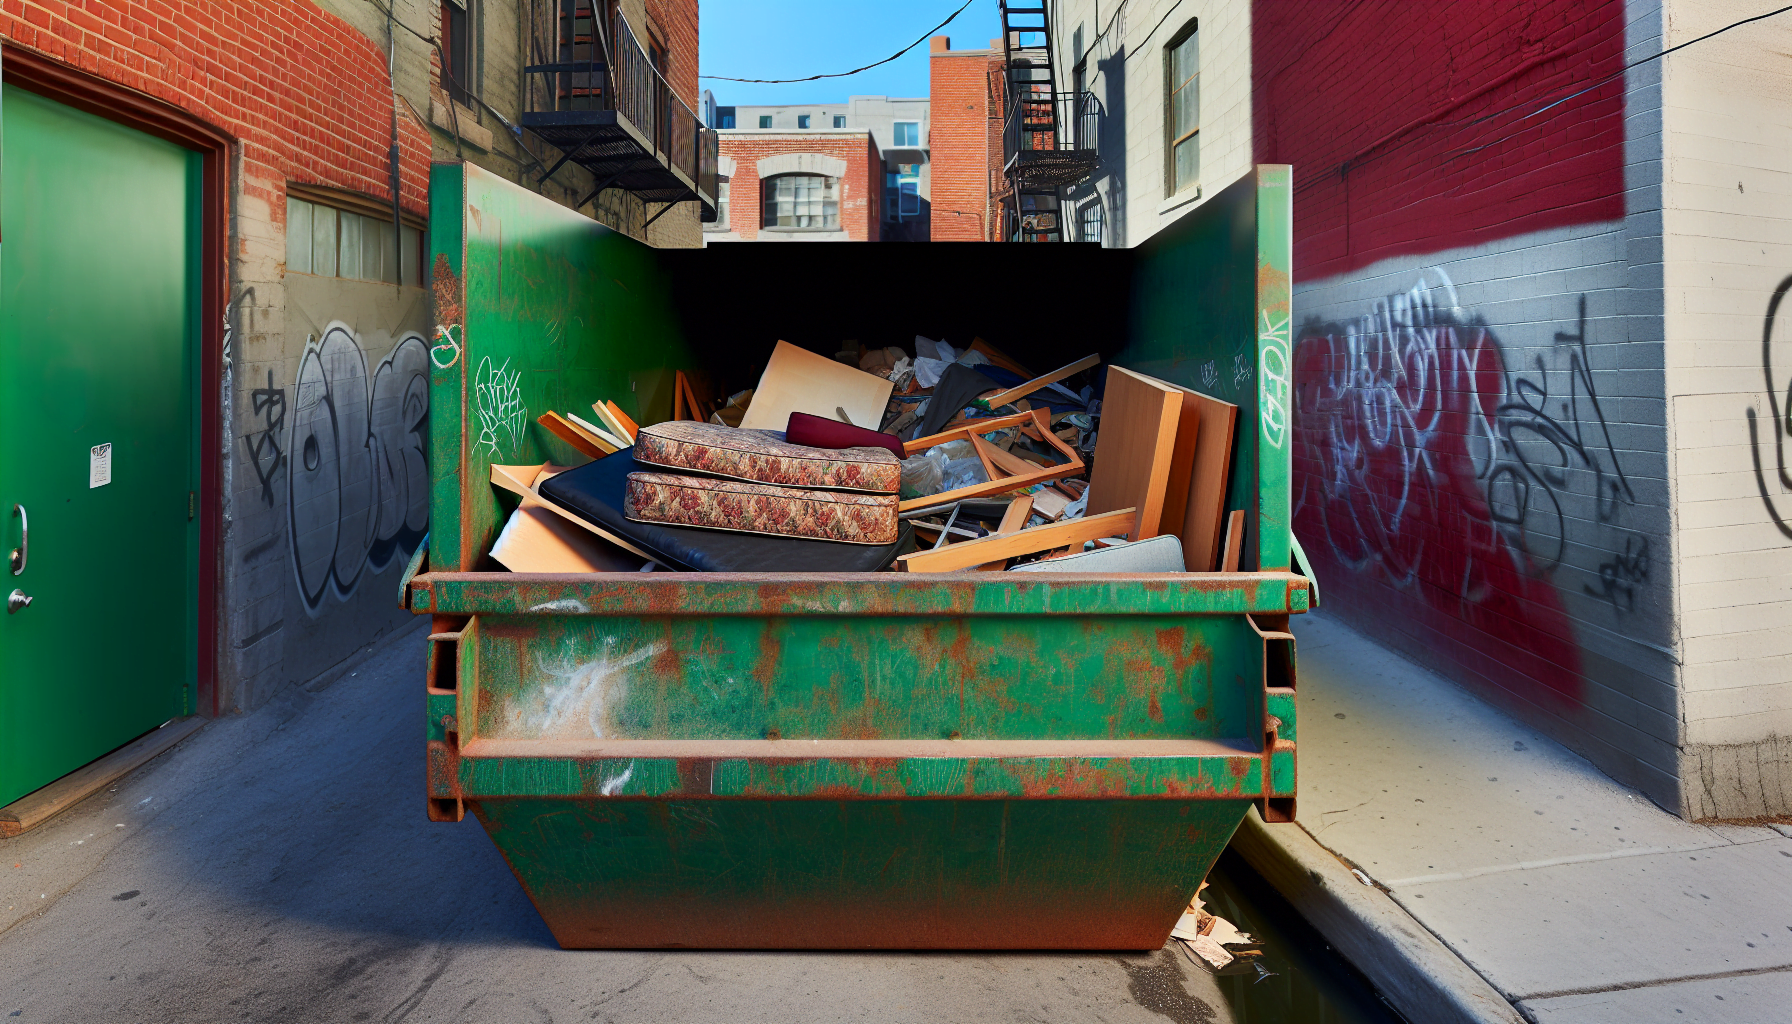 Dumpster with various items including mattresses